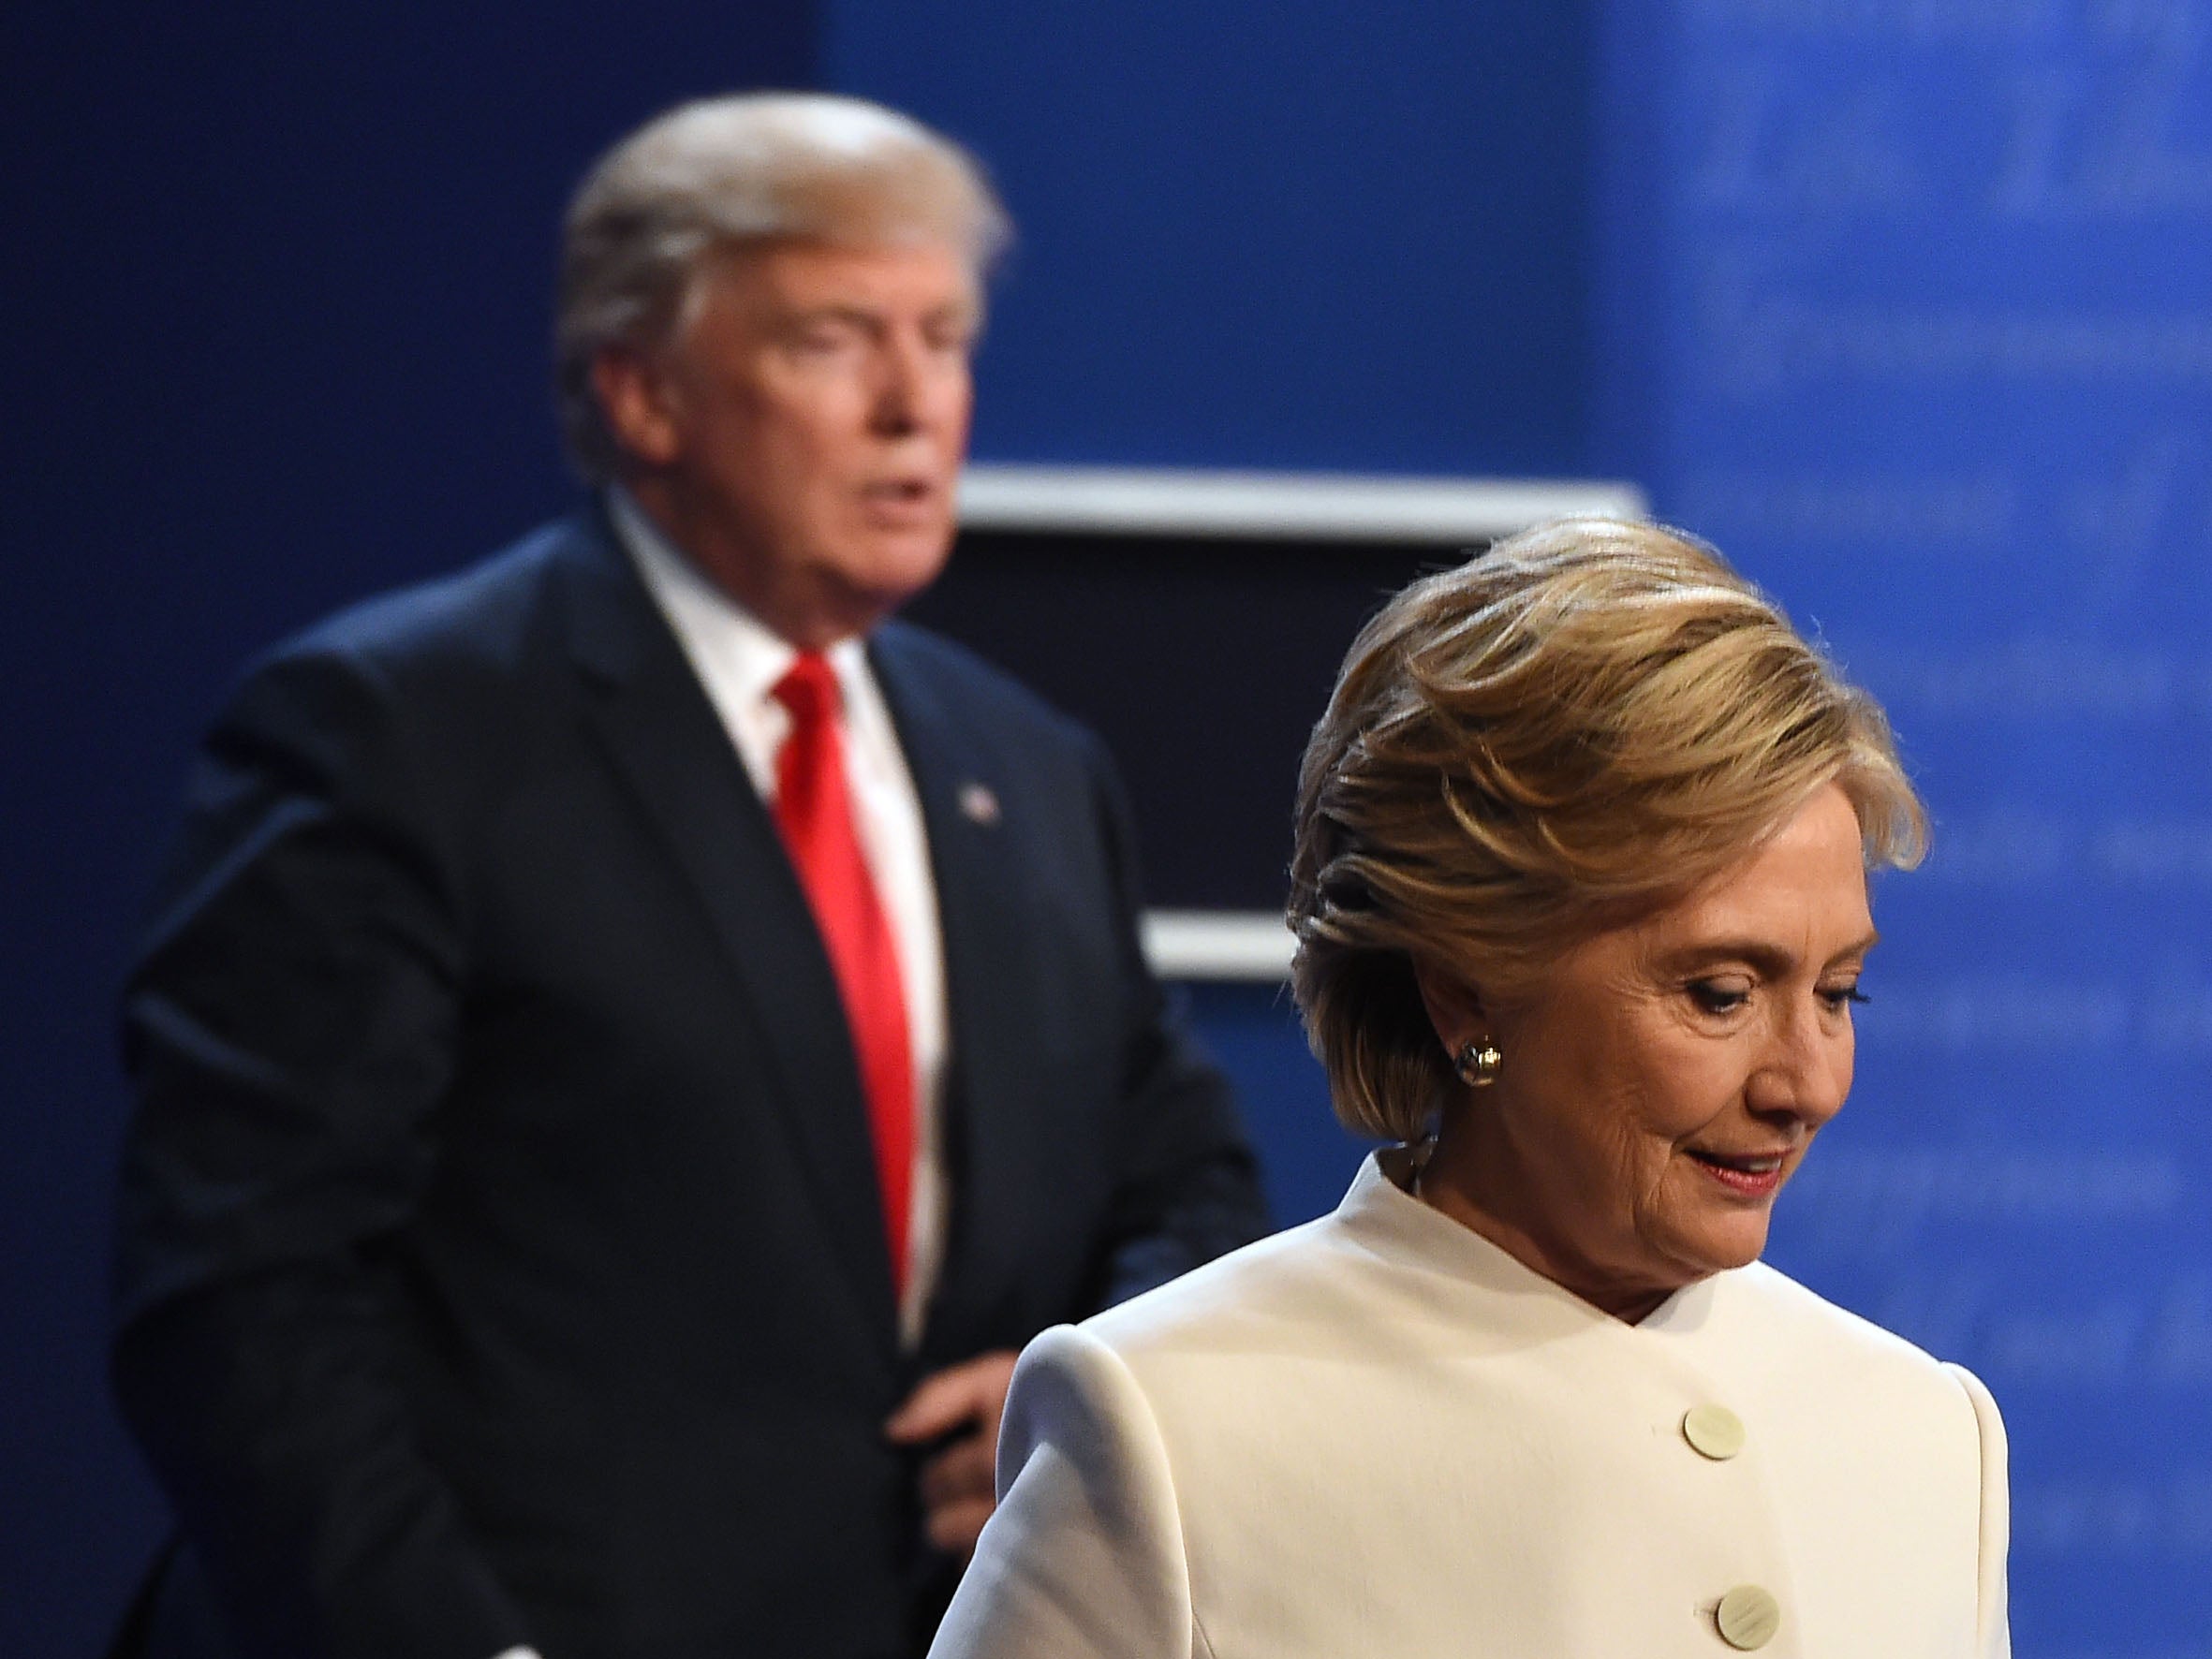 Donald Trump and Hillary Clinton leave the stage after the final presidential debate on 19 October